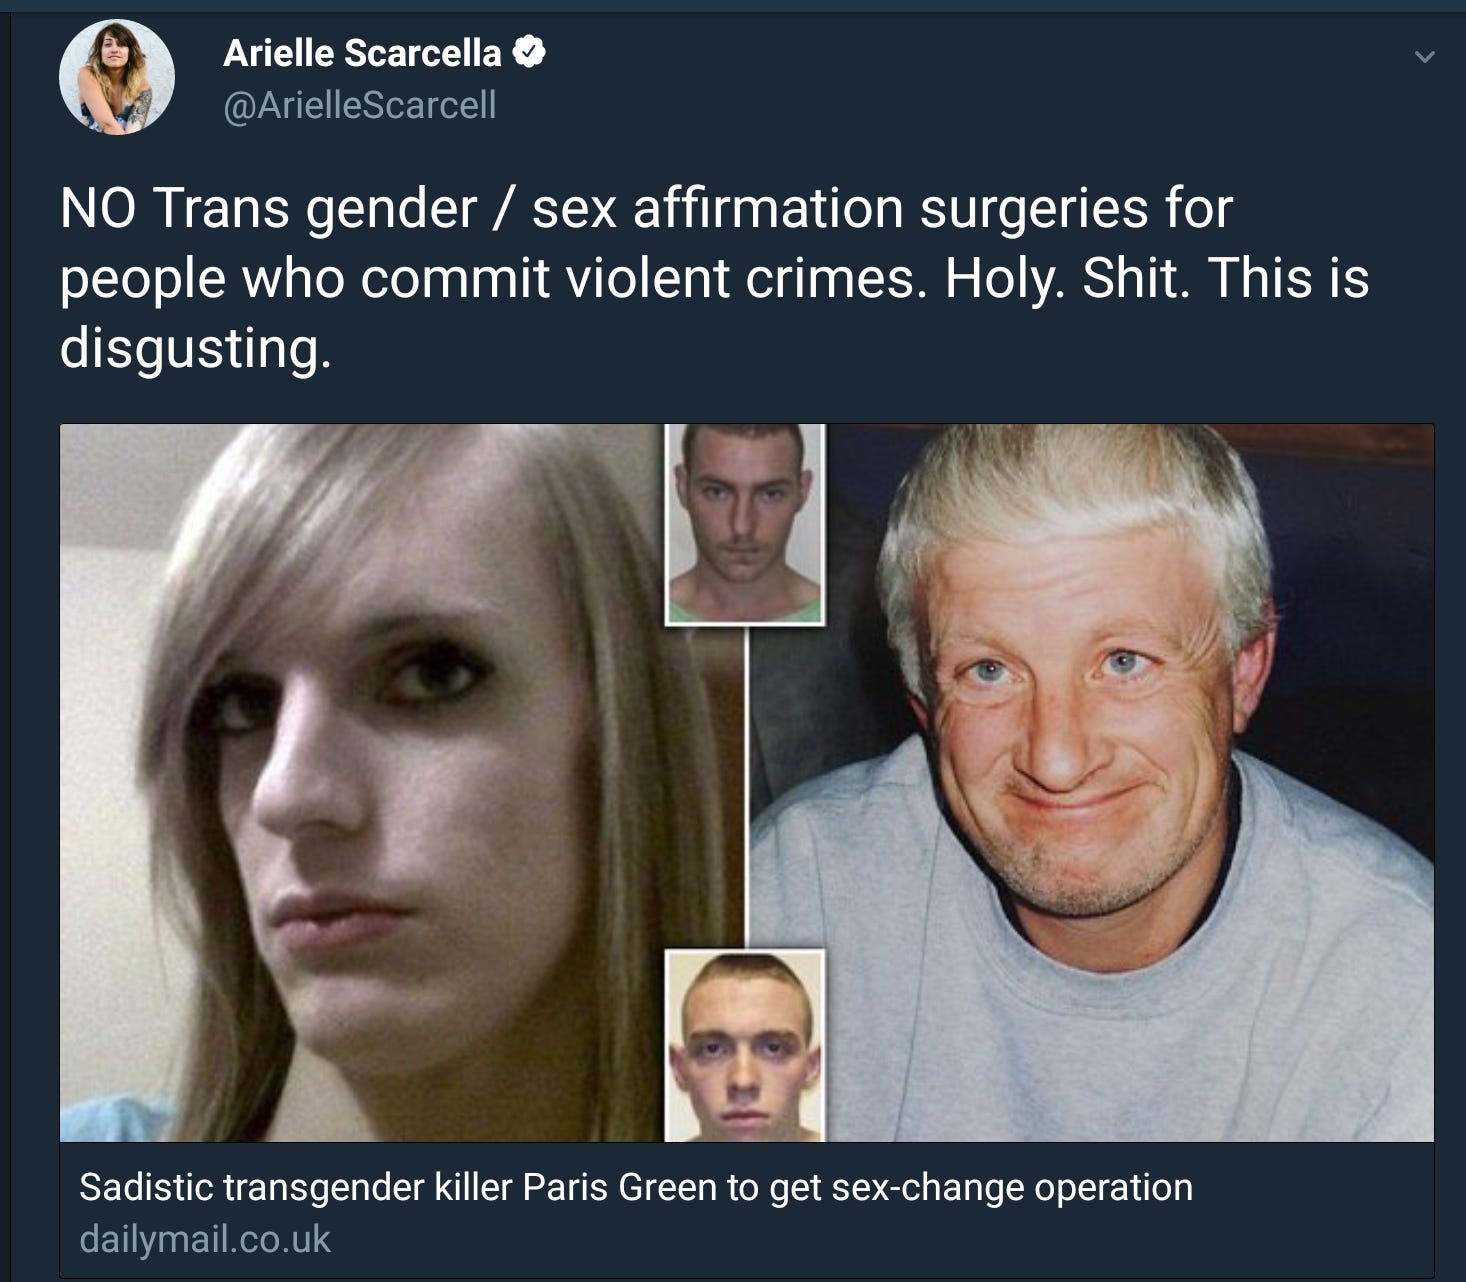 Persons having sex change operations